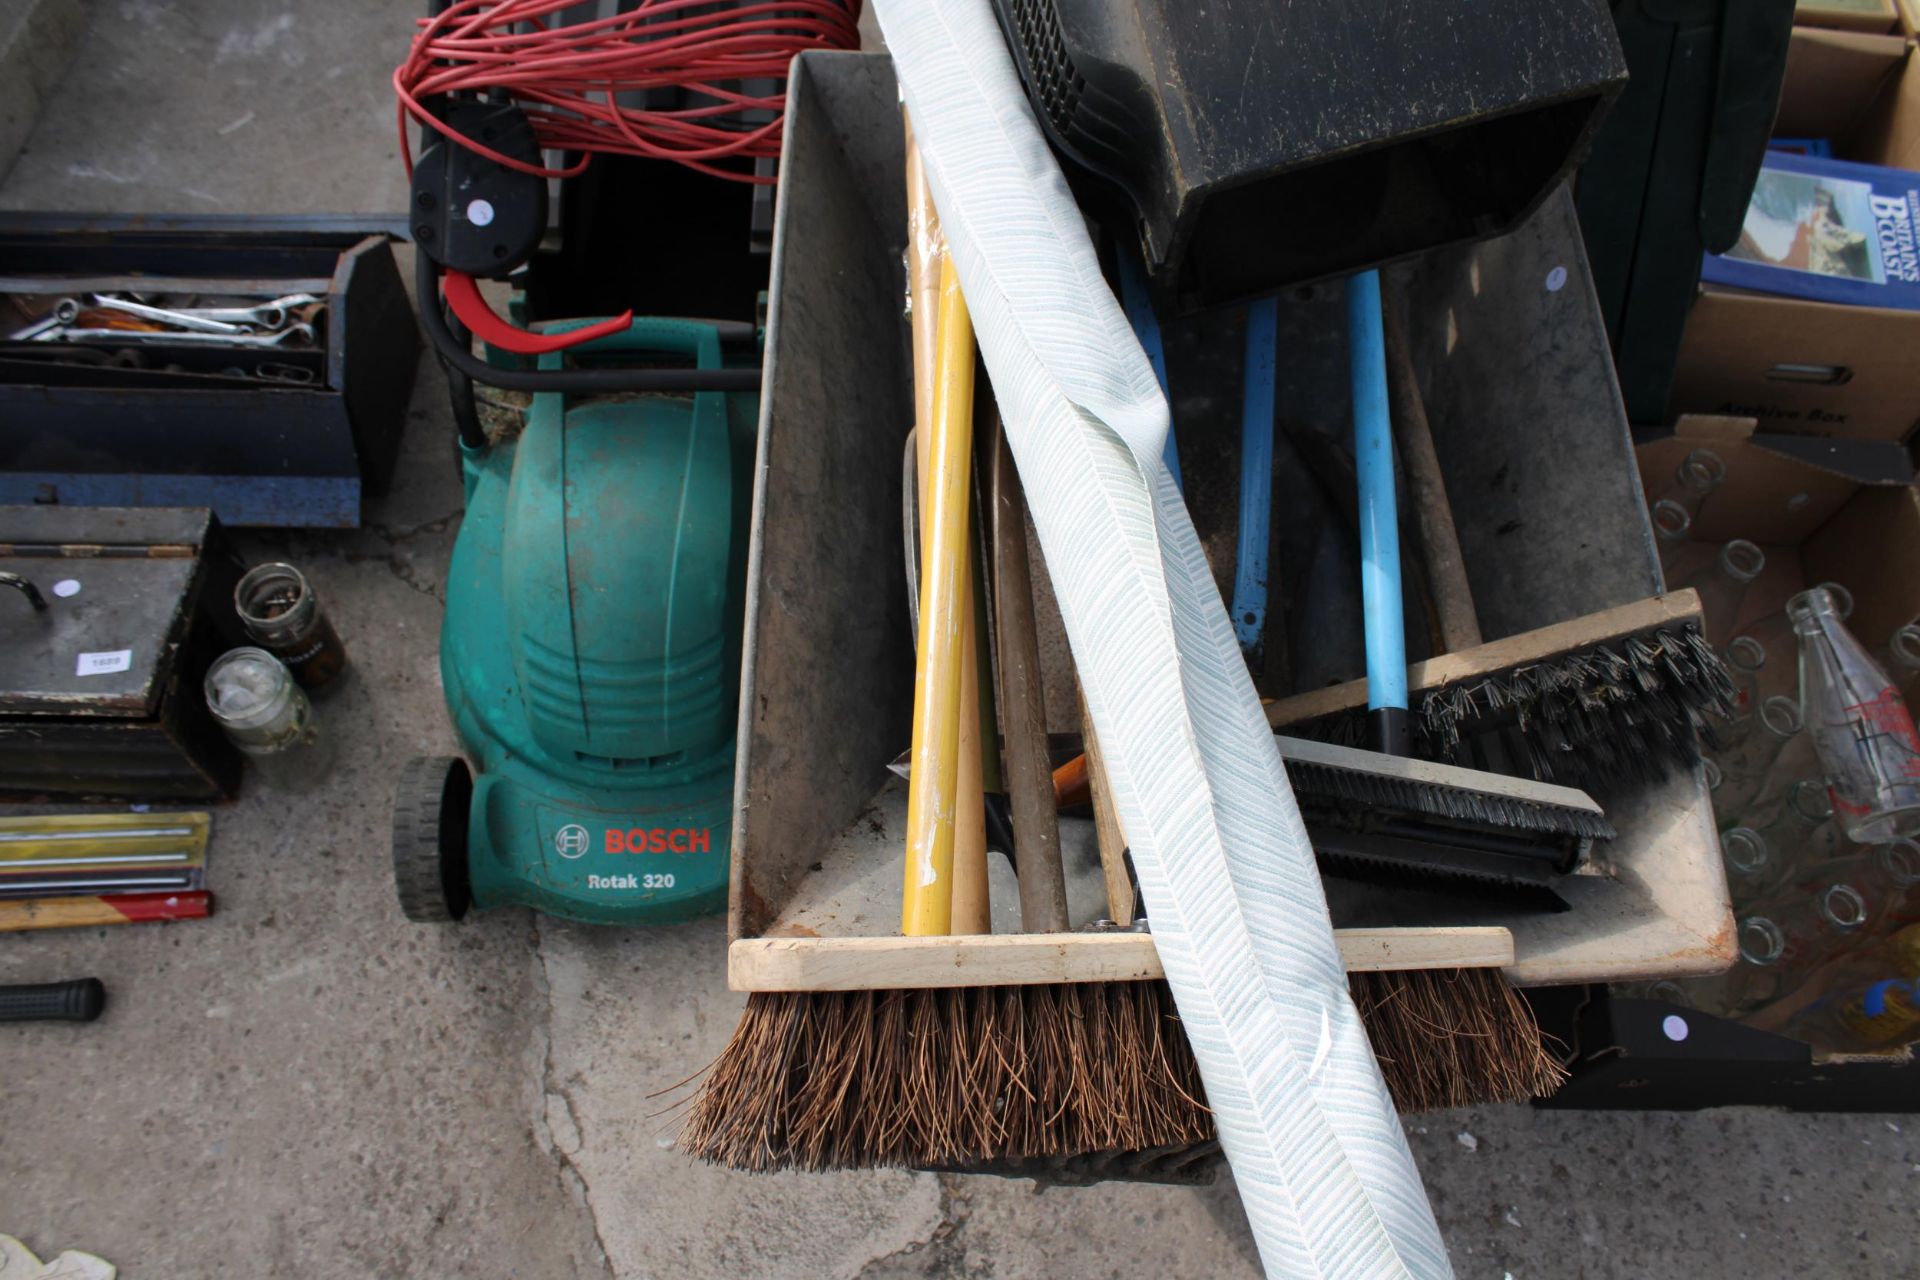 AN ASSORTMENT OF GARDEN TOOLS TO INCLUDE AN ELECTRIC BOSCH ROTAK 320 LAWN MOWER, A WHEEL BARROW - Image 3 of 4